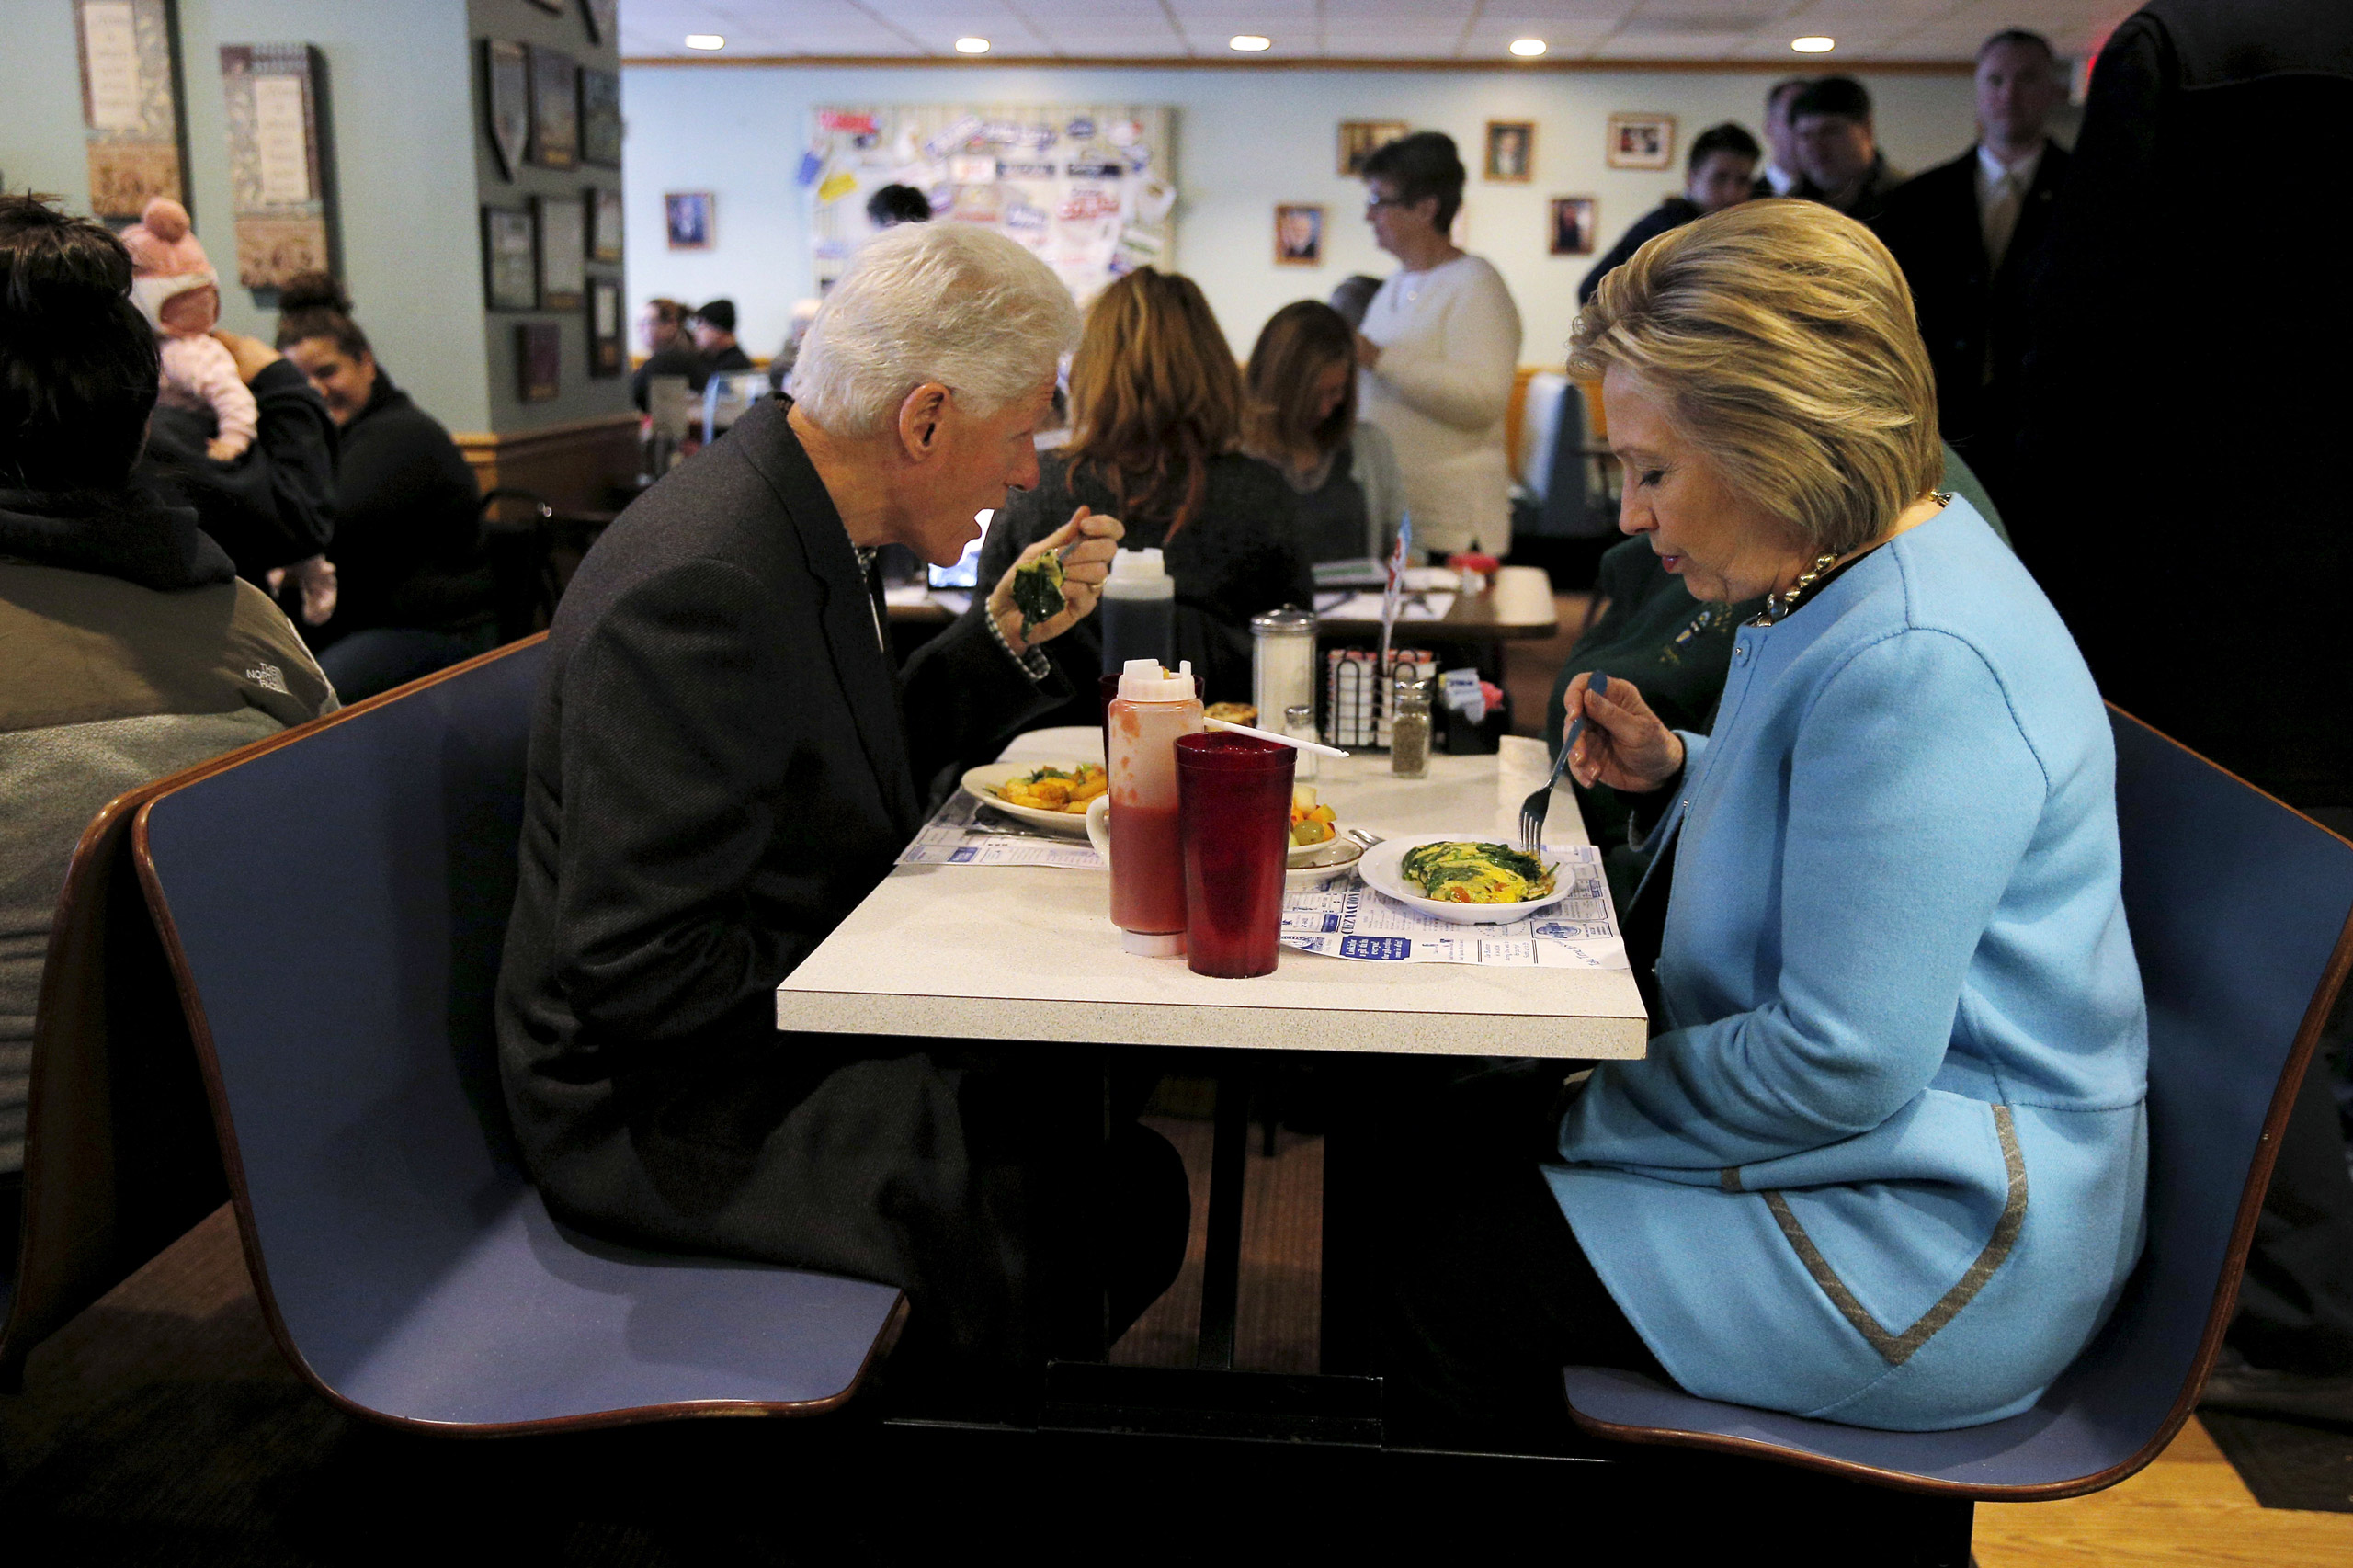 U.S. Democratic presidential candidate Hillary Clinton and her husband, former U.S. President Bill Clinton eat breakfast at the Chez Vachon restaurant in Manchester, New Hampshire February 8, 2016.  REUTERS/Brian Snyder - RTX260DC